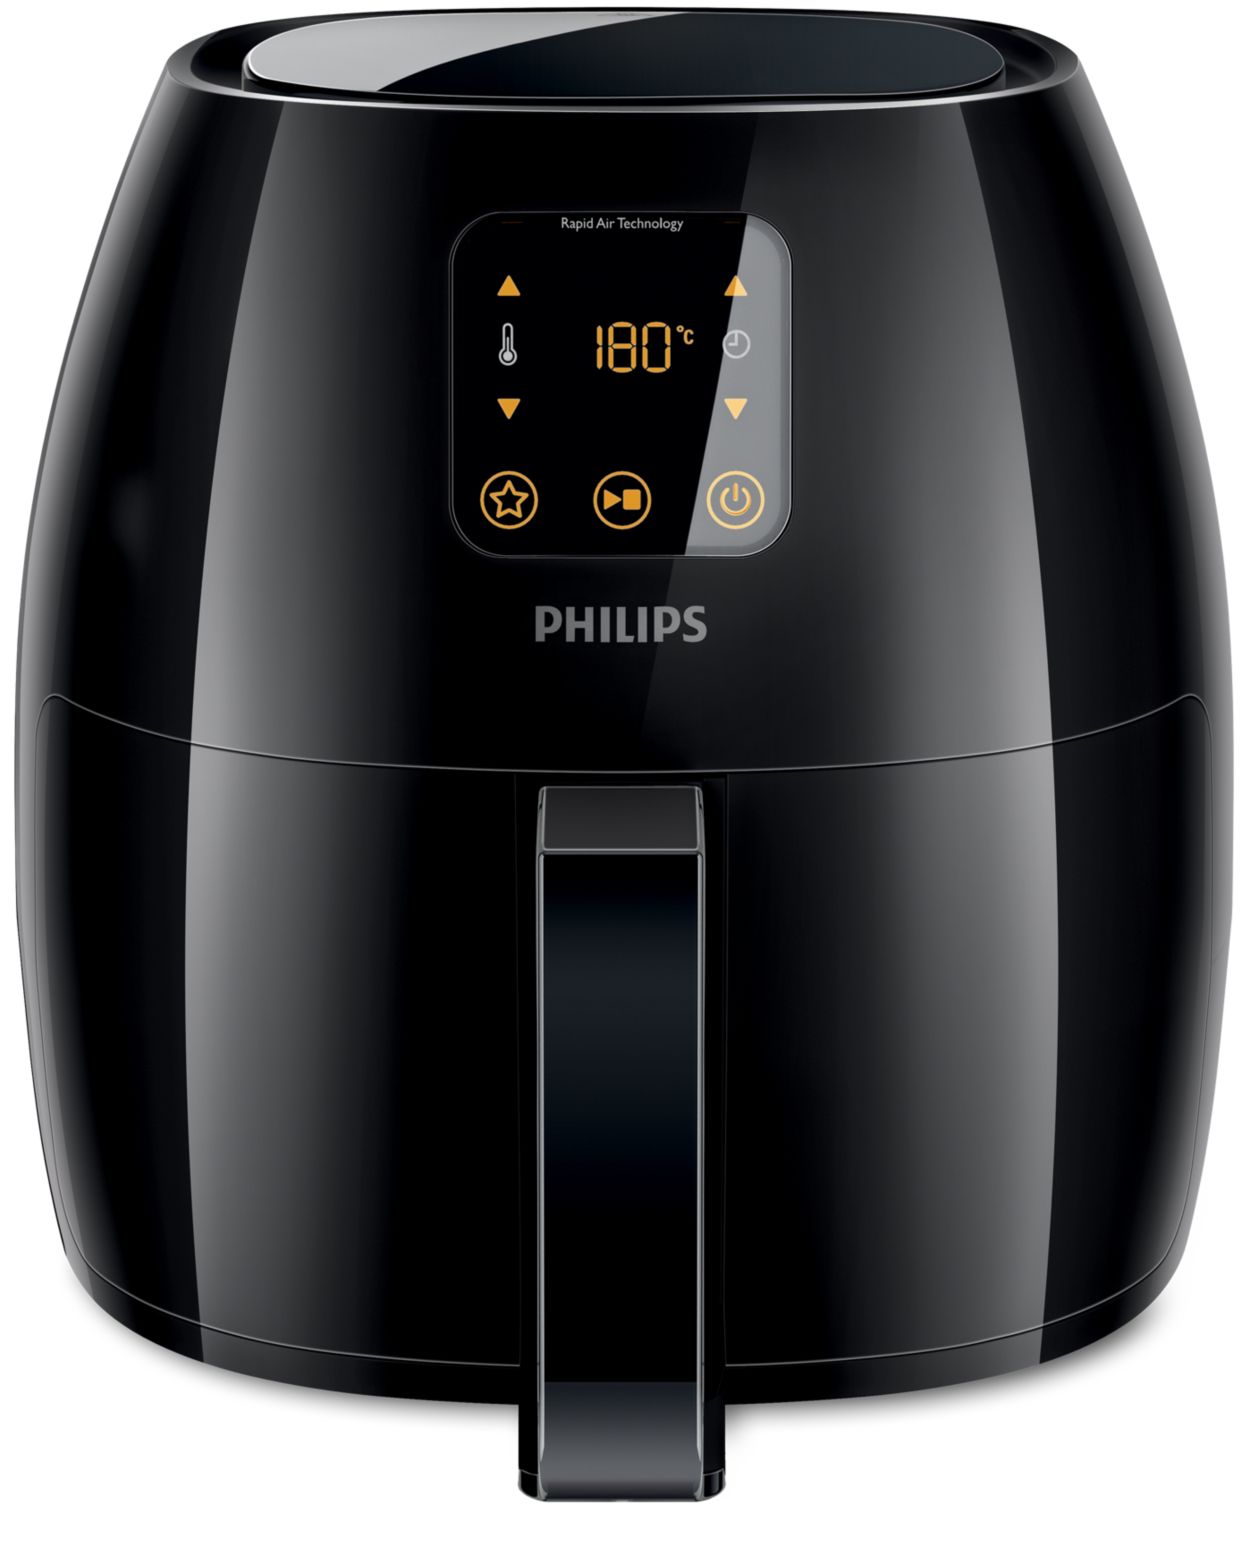 Philips Airfryer XL with Wi-Fi connectivity, app control launched at Rs  17,995 - Times of India